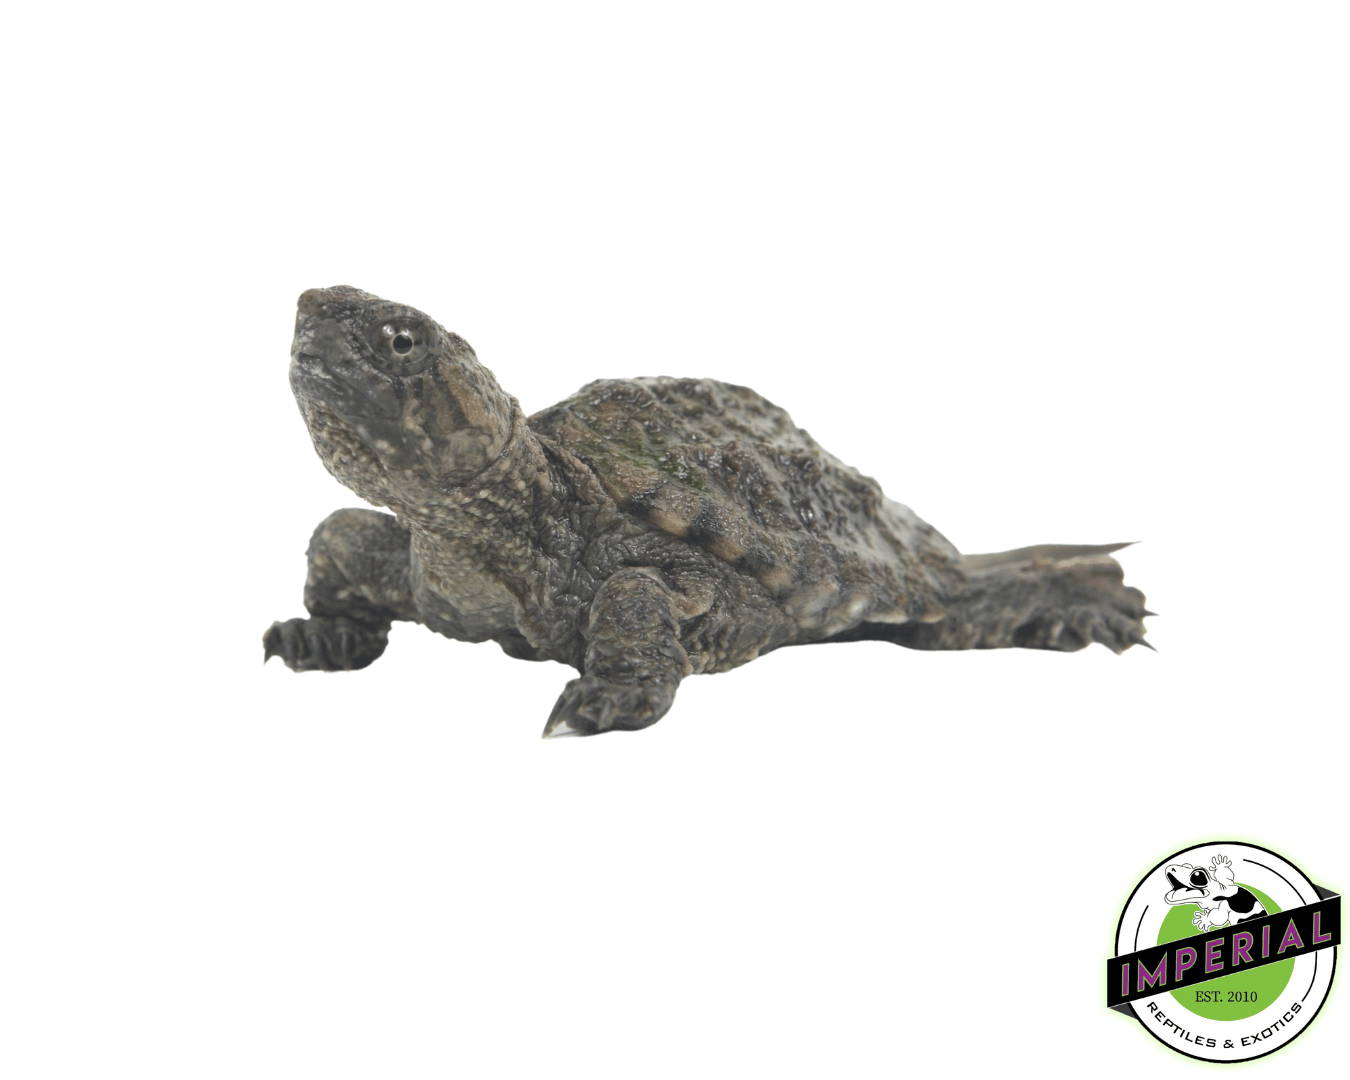 common snapping turtle for sale, buy reptiles online